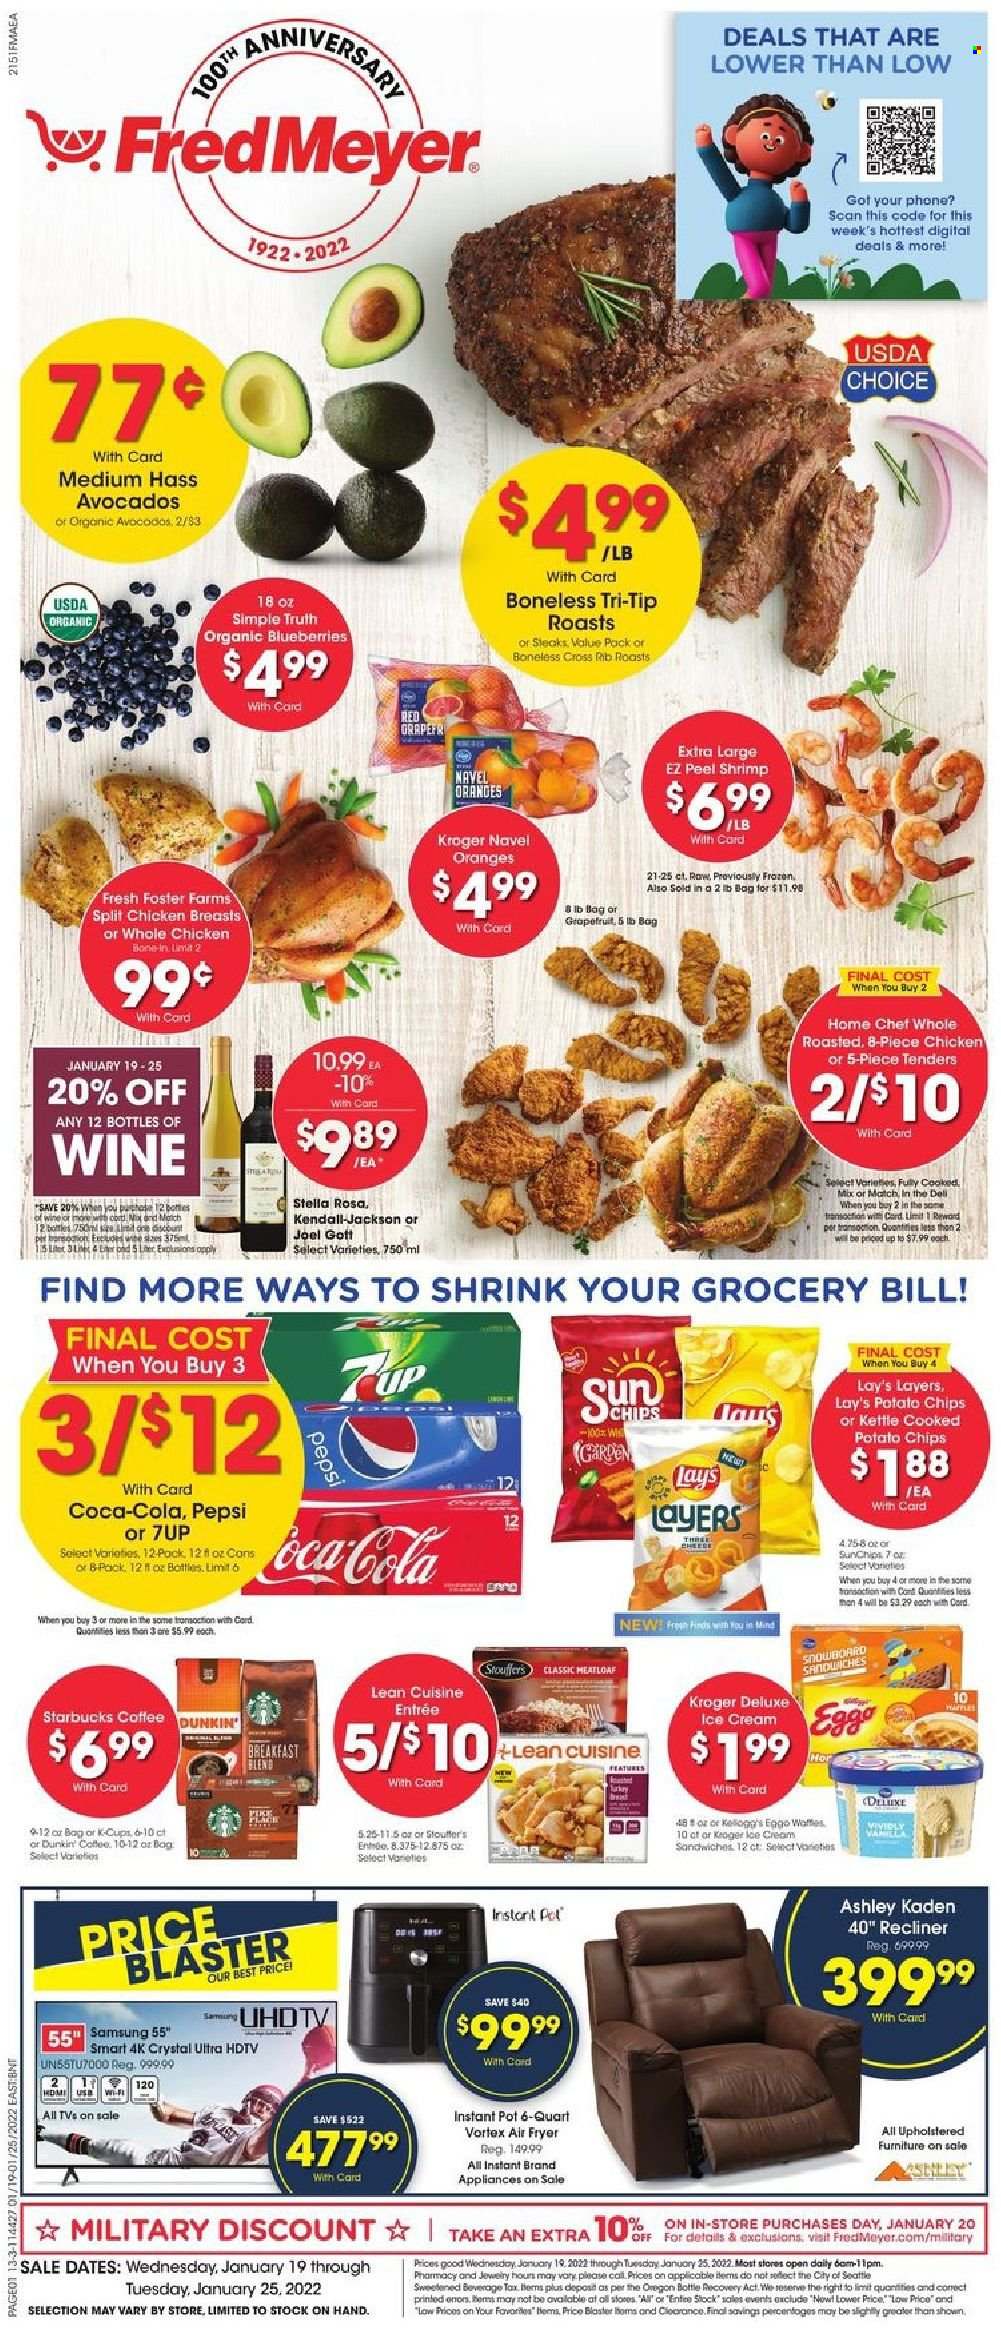 thumbnail - Fred Meyer Flyer - 01/19/2022 - 01/25/2022 - Sales products - avocado, blueberries, oranges, shrimps, meatloaf, Lean Cuisine, cheese, eggs, ice cream, potato chips, Lay’s, Coca-Cola, Pepsi, 7UP, coffee, Starbucks, coffee capsules, K-Cups, wine, whole chicken, chicken breasts, pot, Samsung, UHD TV, HDTV, TV, air fryer, Instant Pot, recliner chair, navel oranges. Page 1.